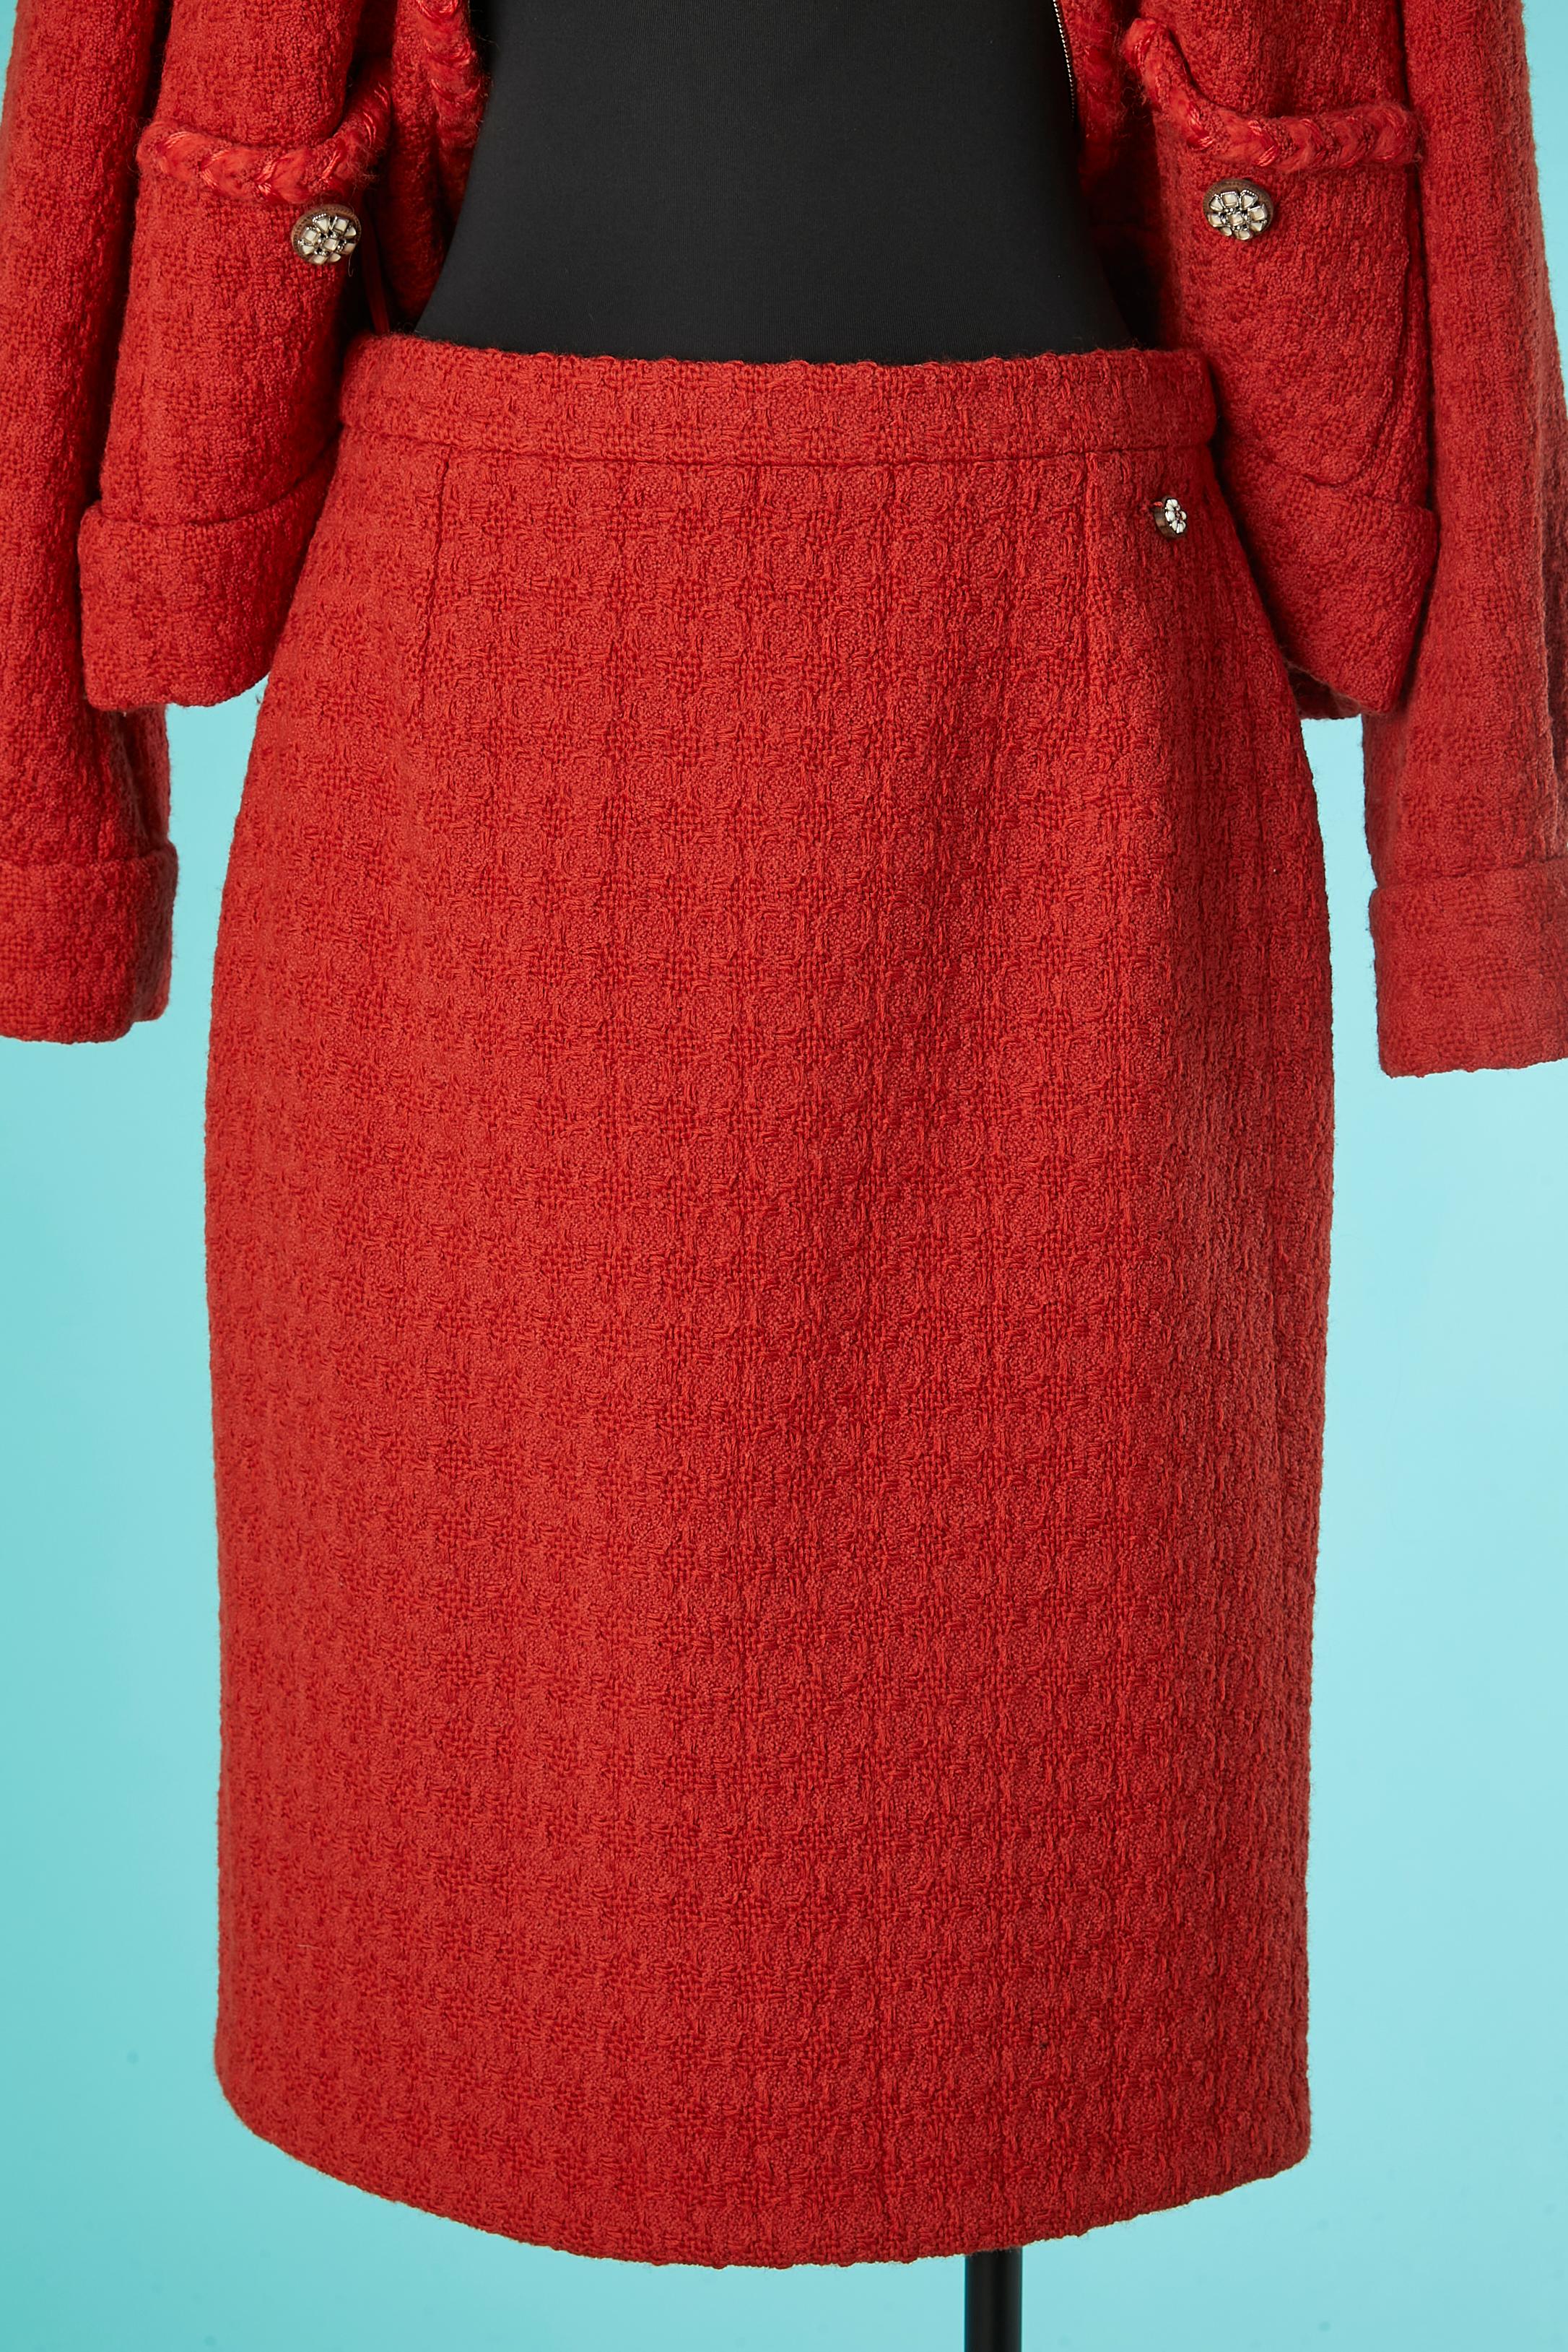 Red tweed skirt-suit Chanel  5